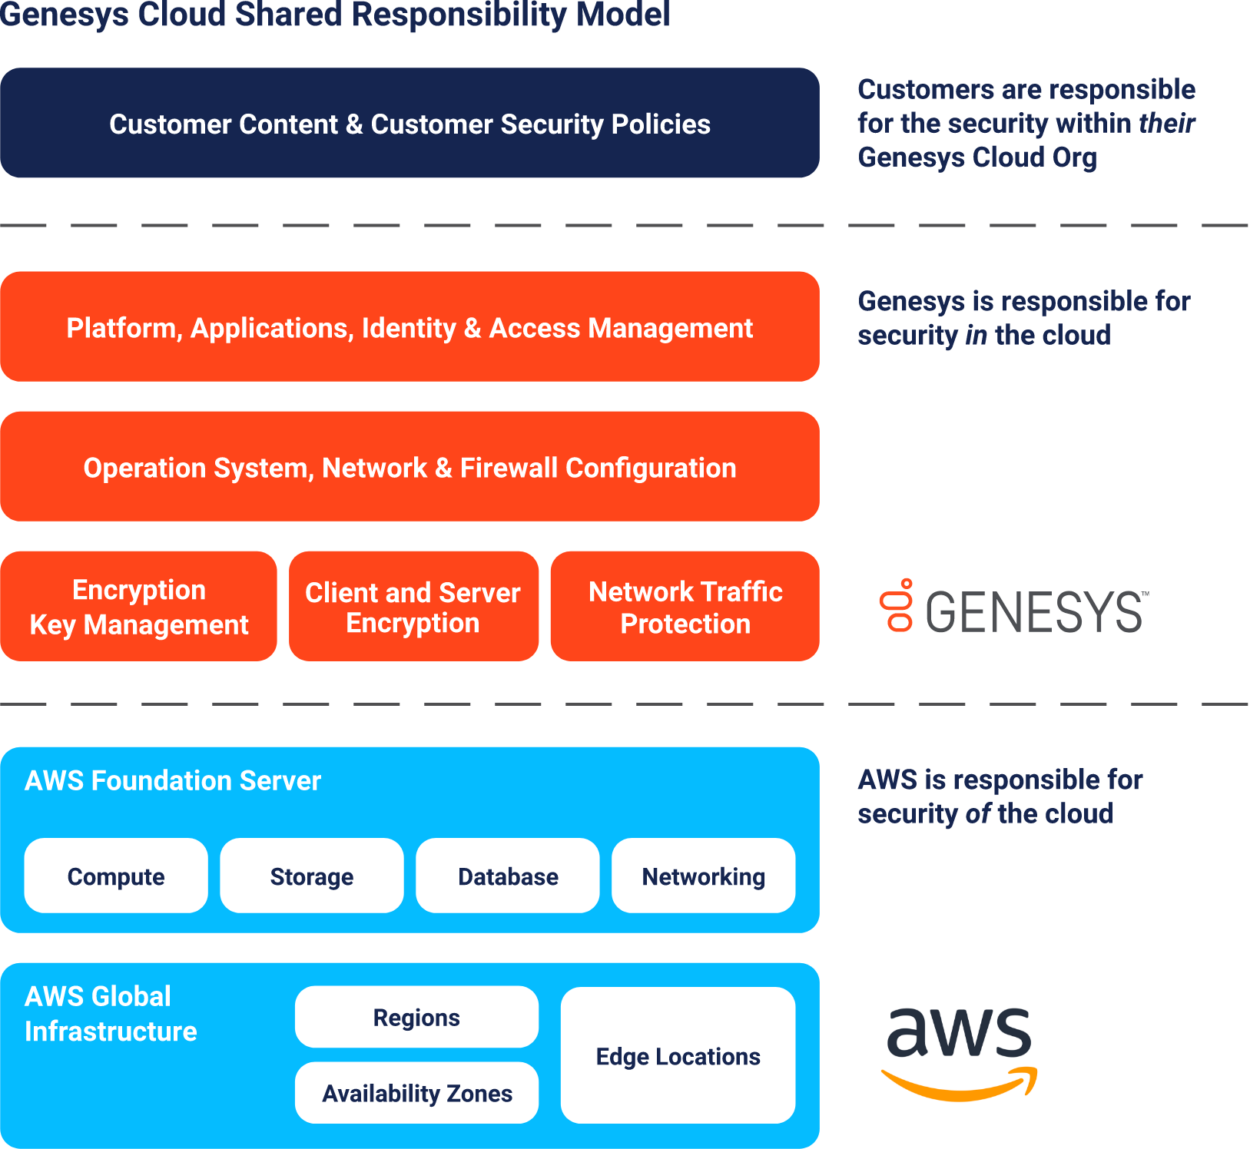 Genesys aws shared responsibility graphic